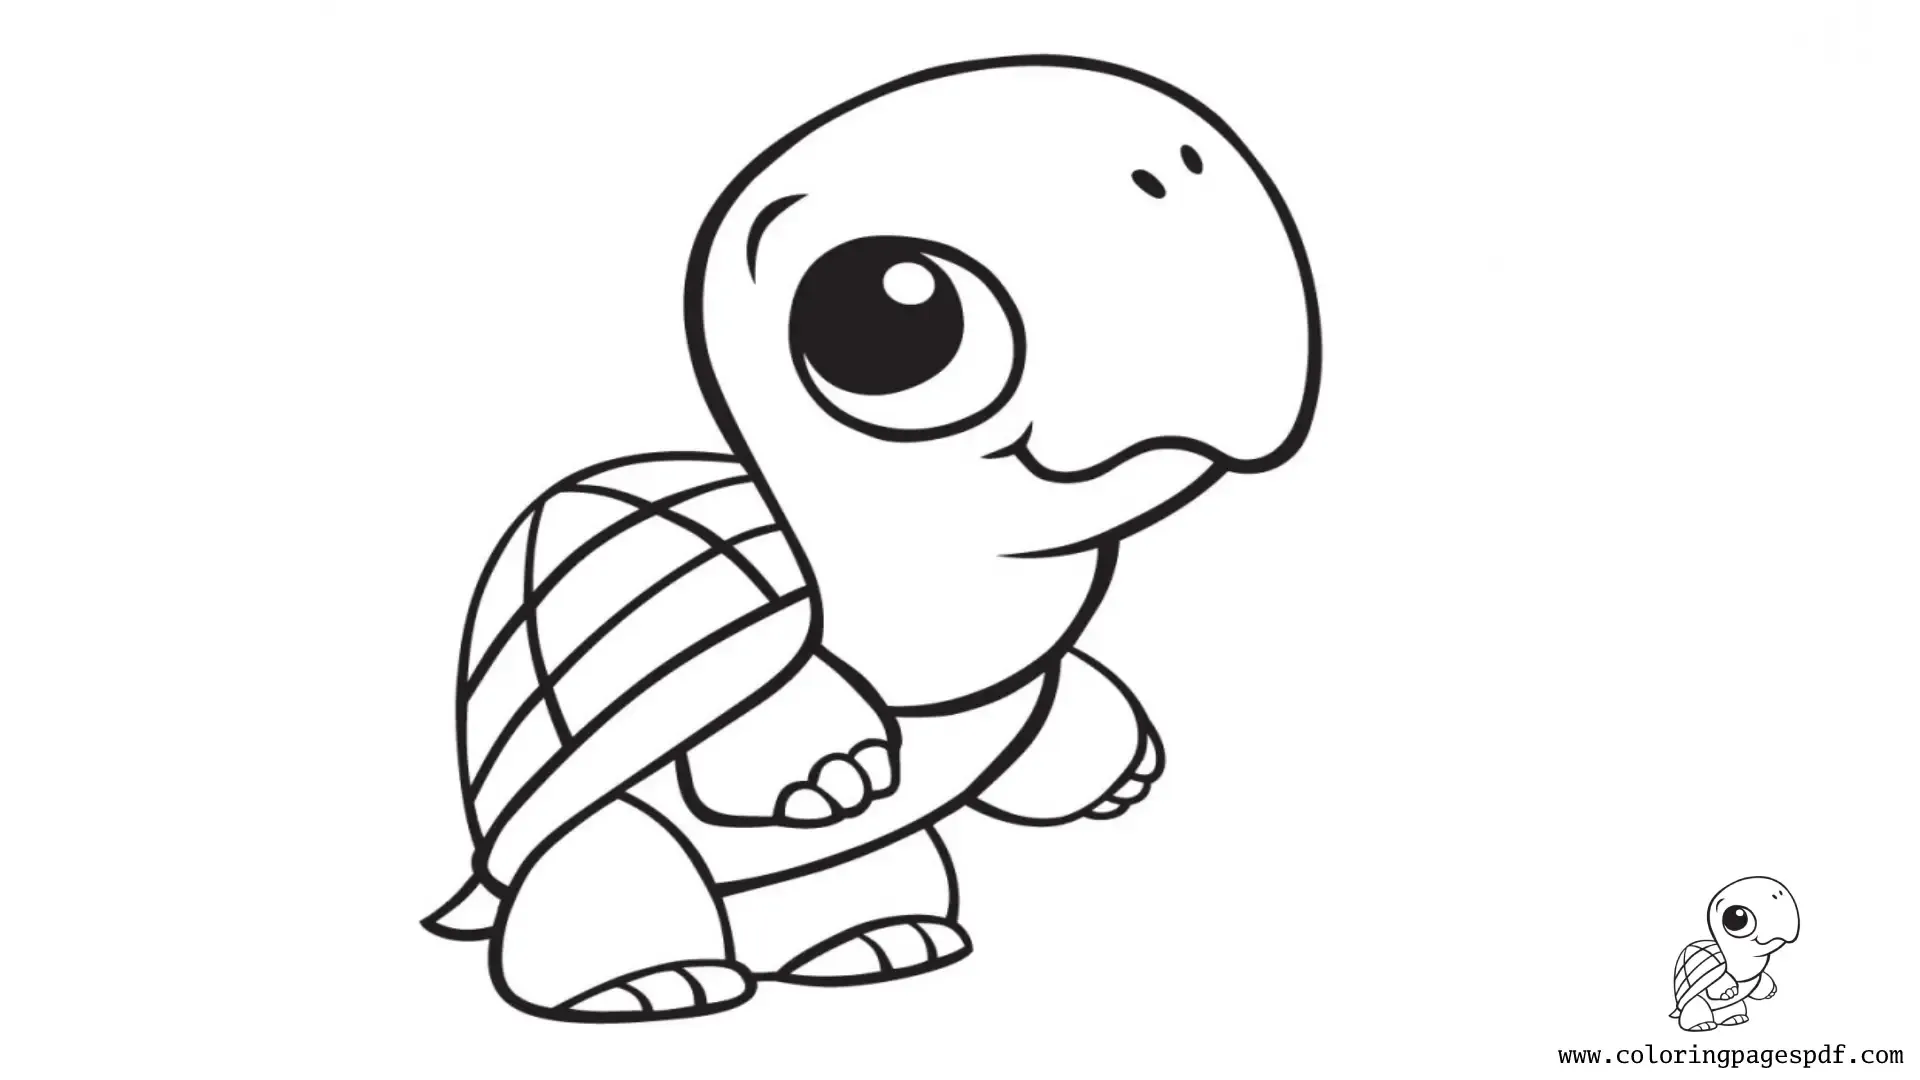 Coloring Page Of A Mini Cute Turtle